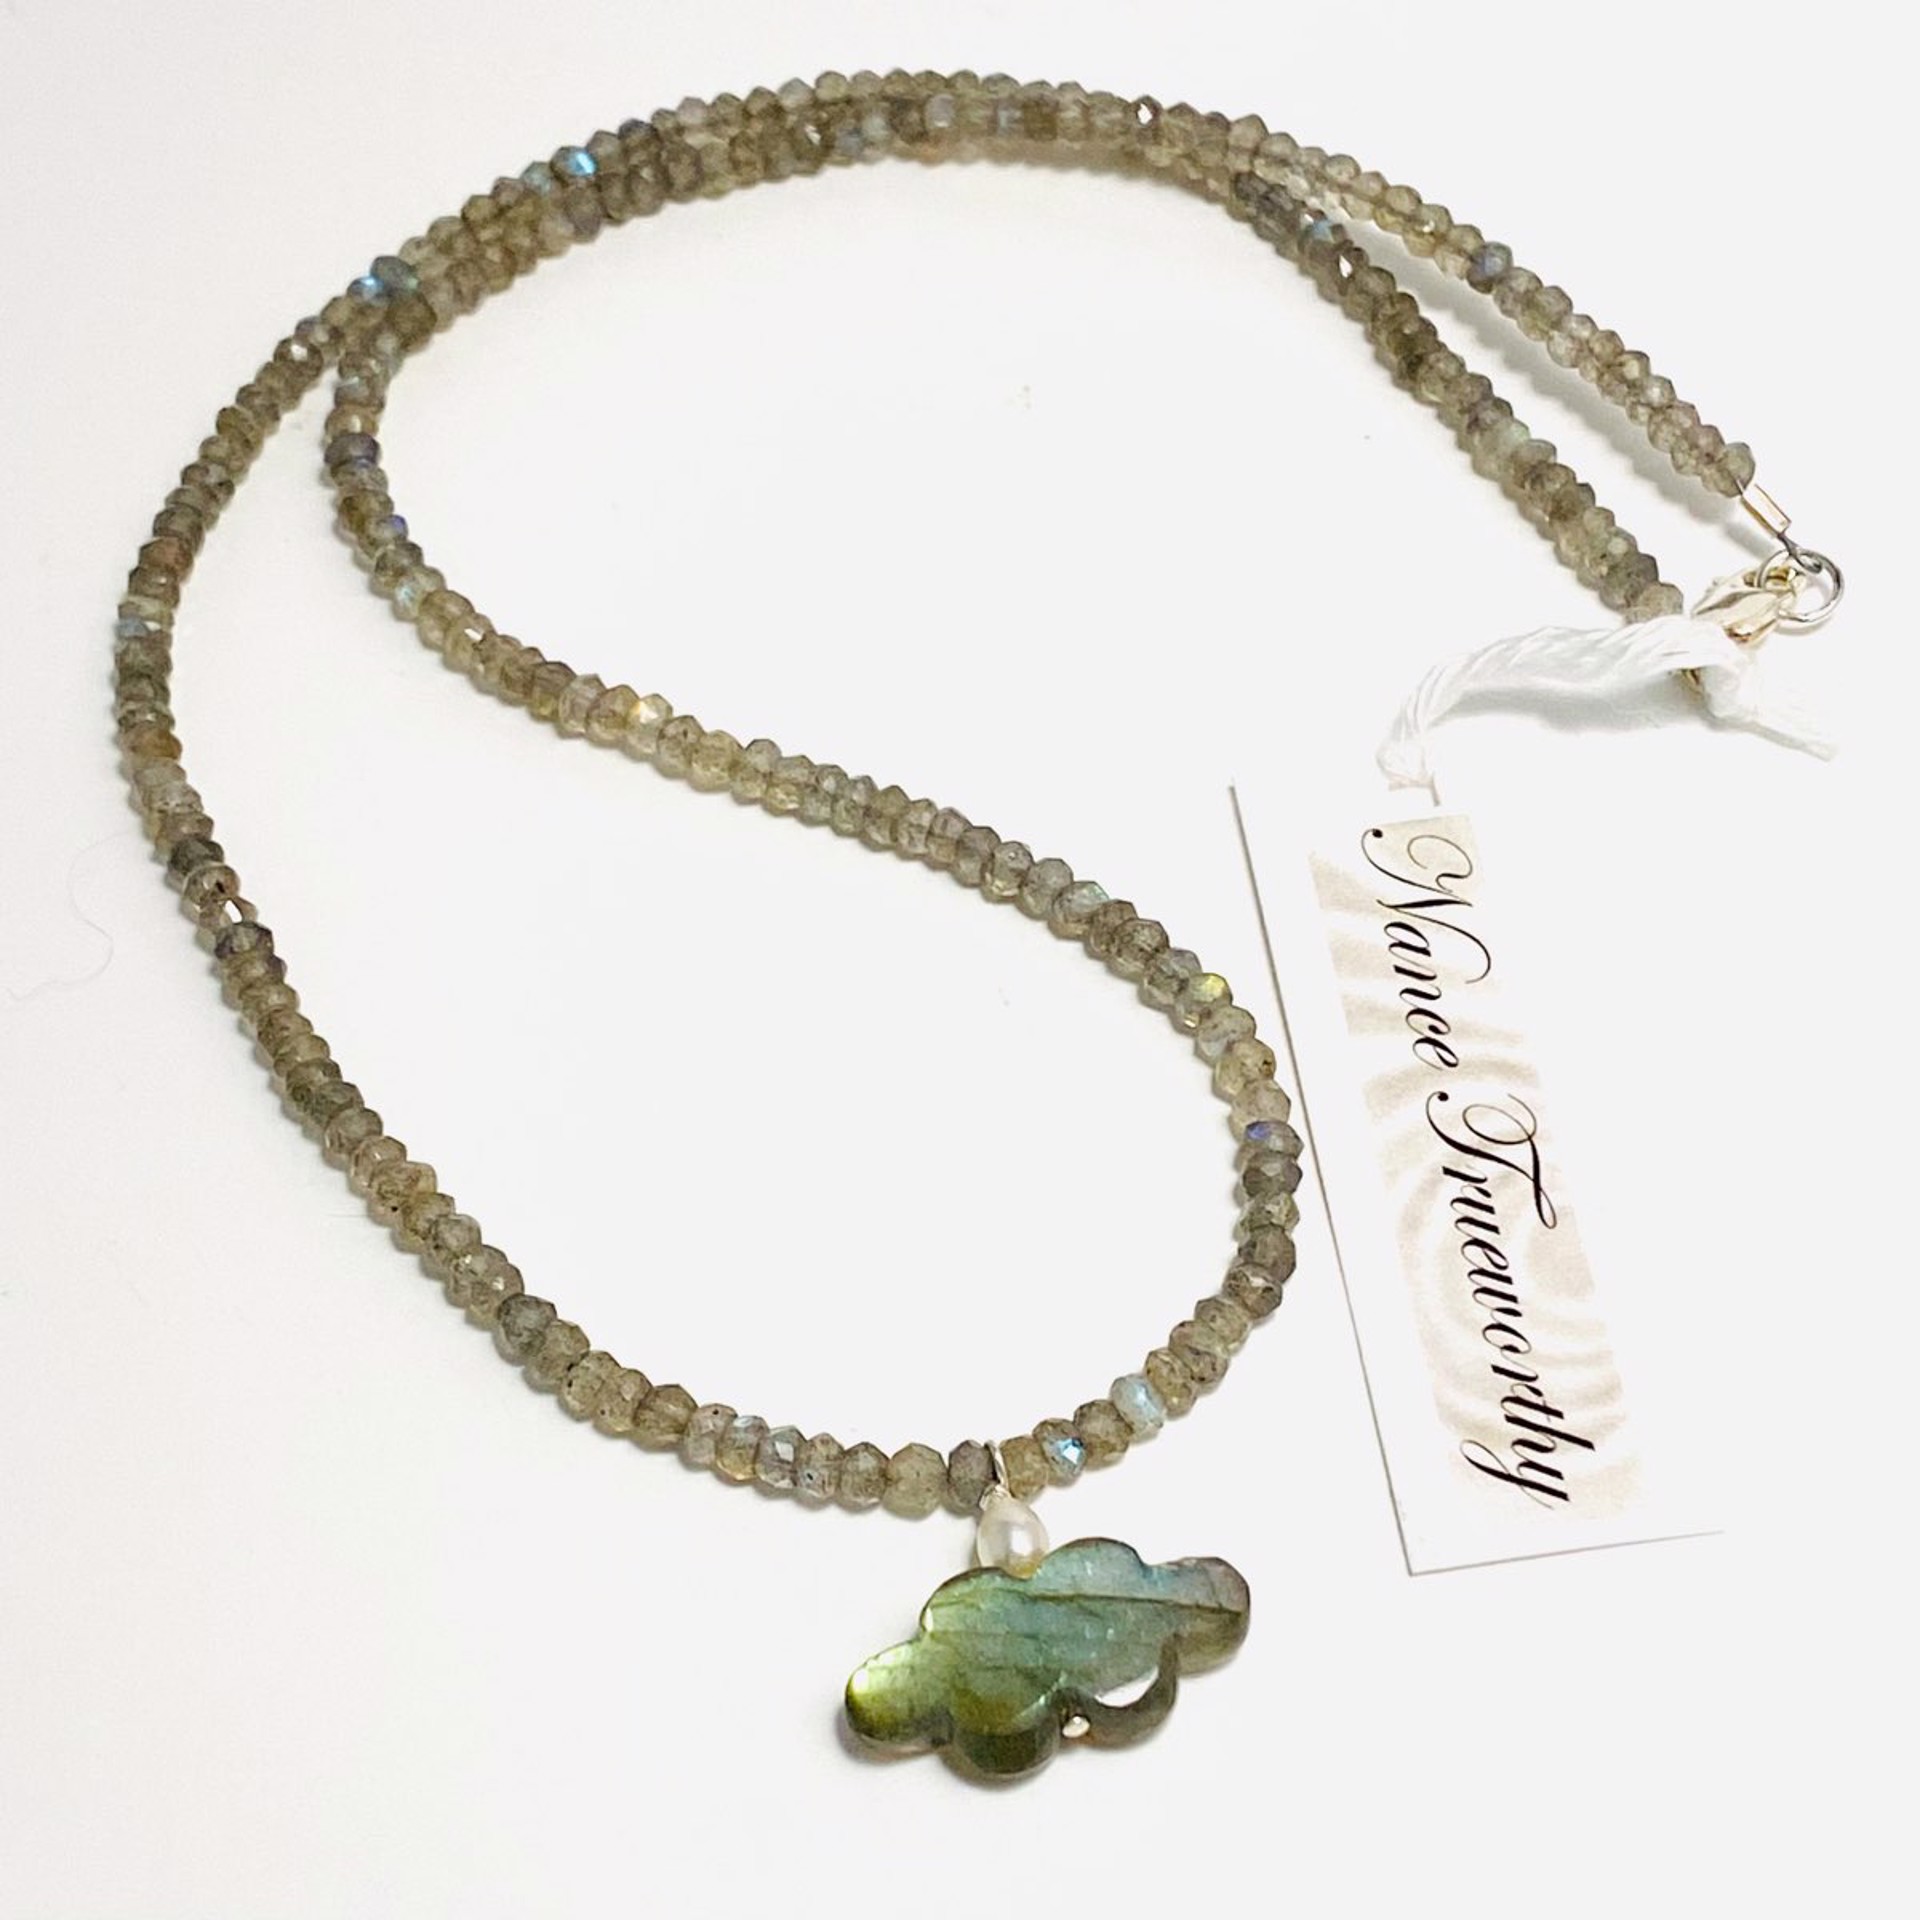 NT22-179 Faceted Labradorite Pearl Labradorite Cloud Drop Necklace by Nance Trueworthy